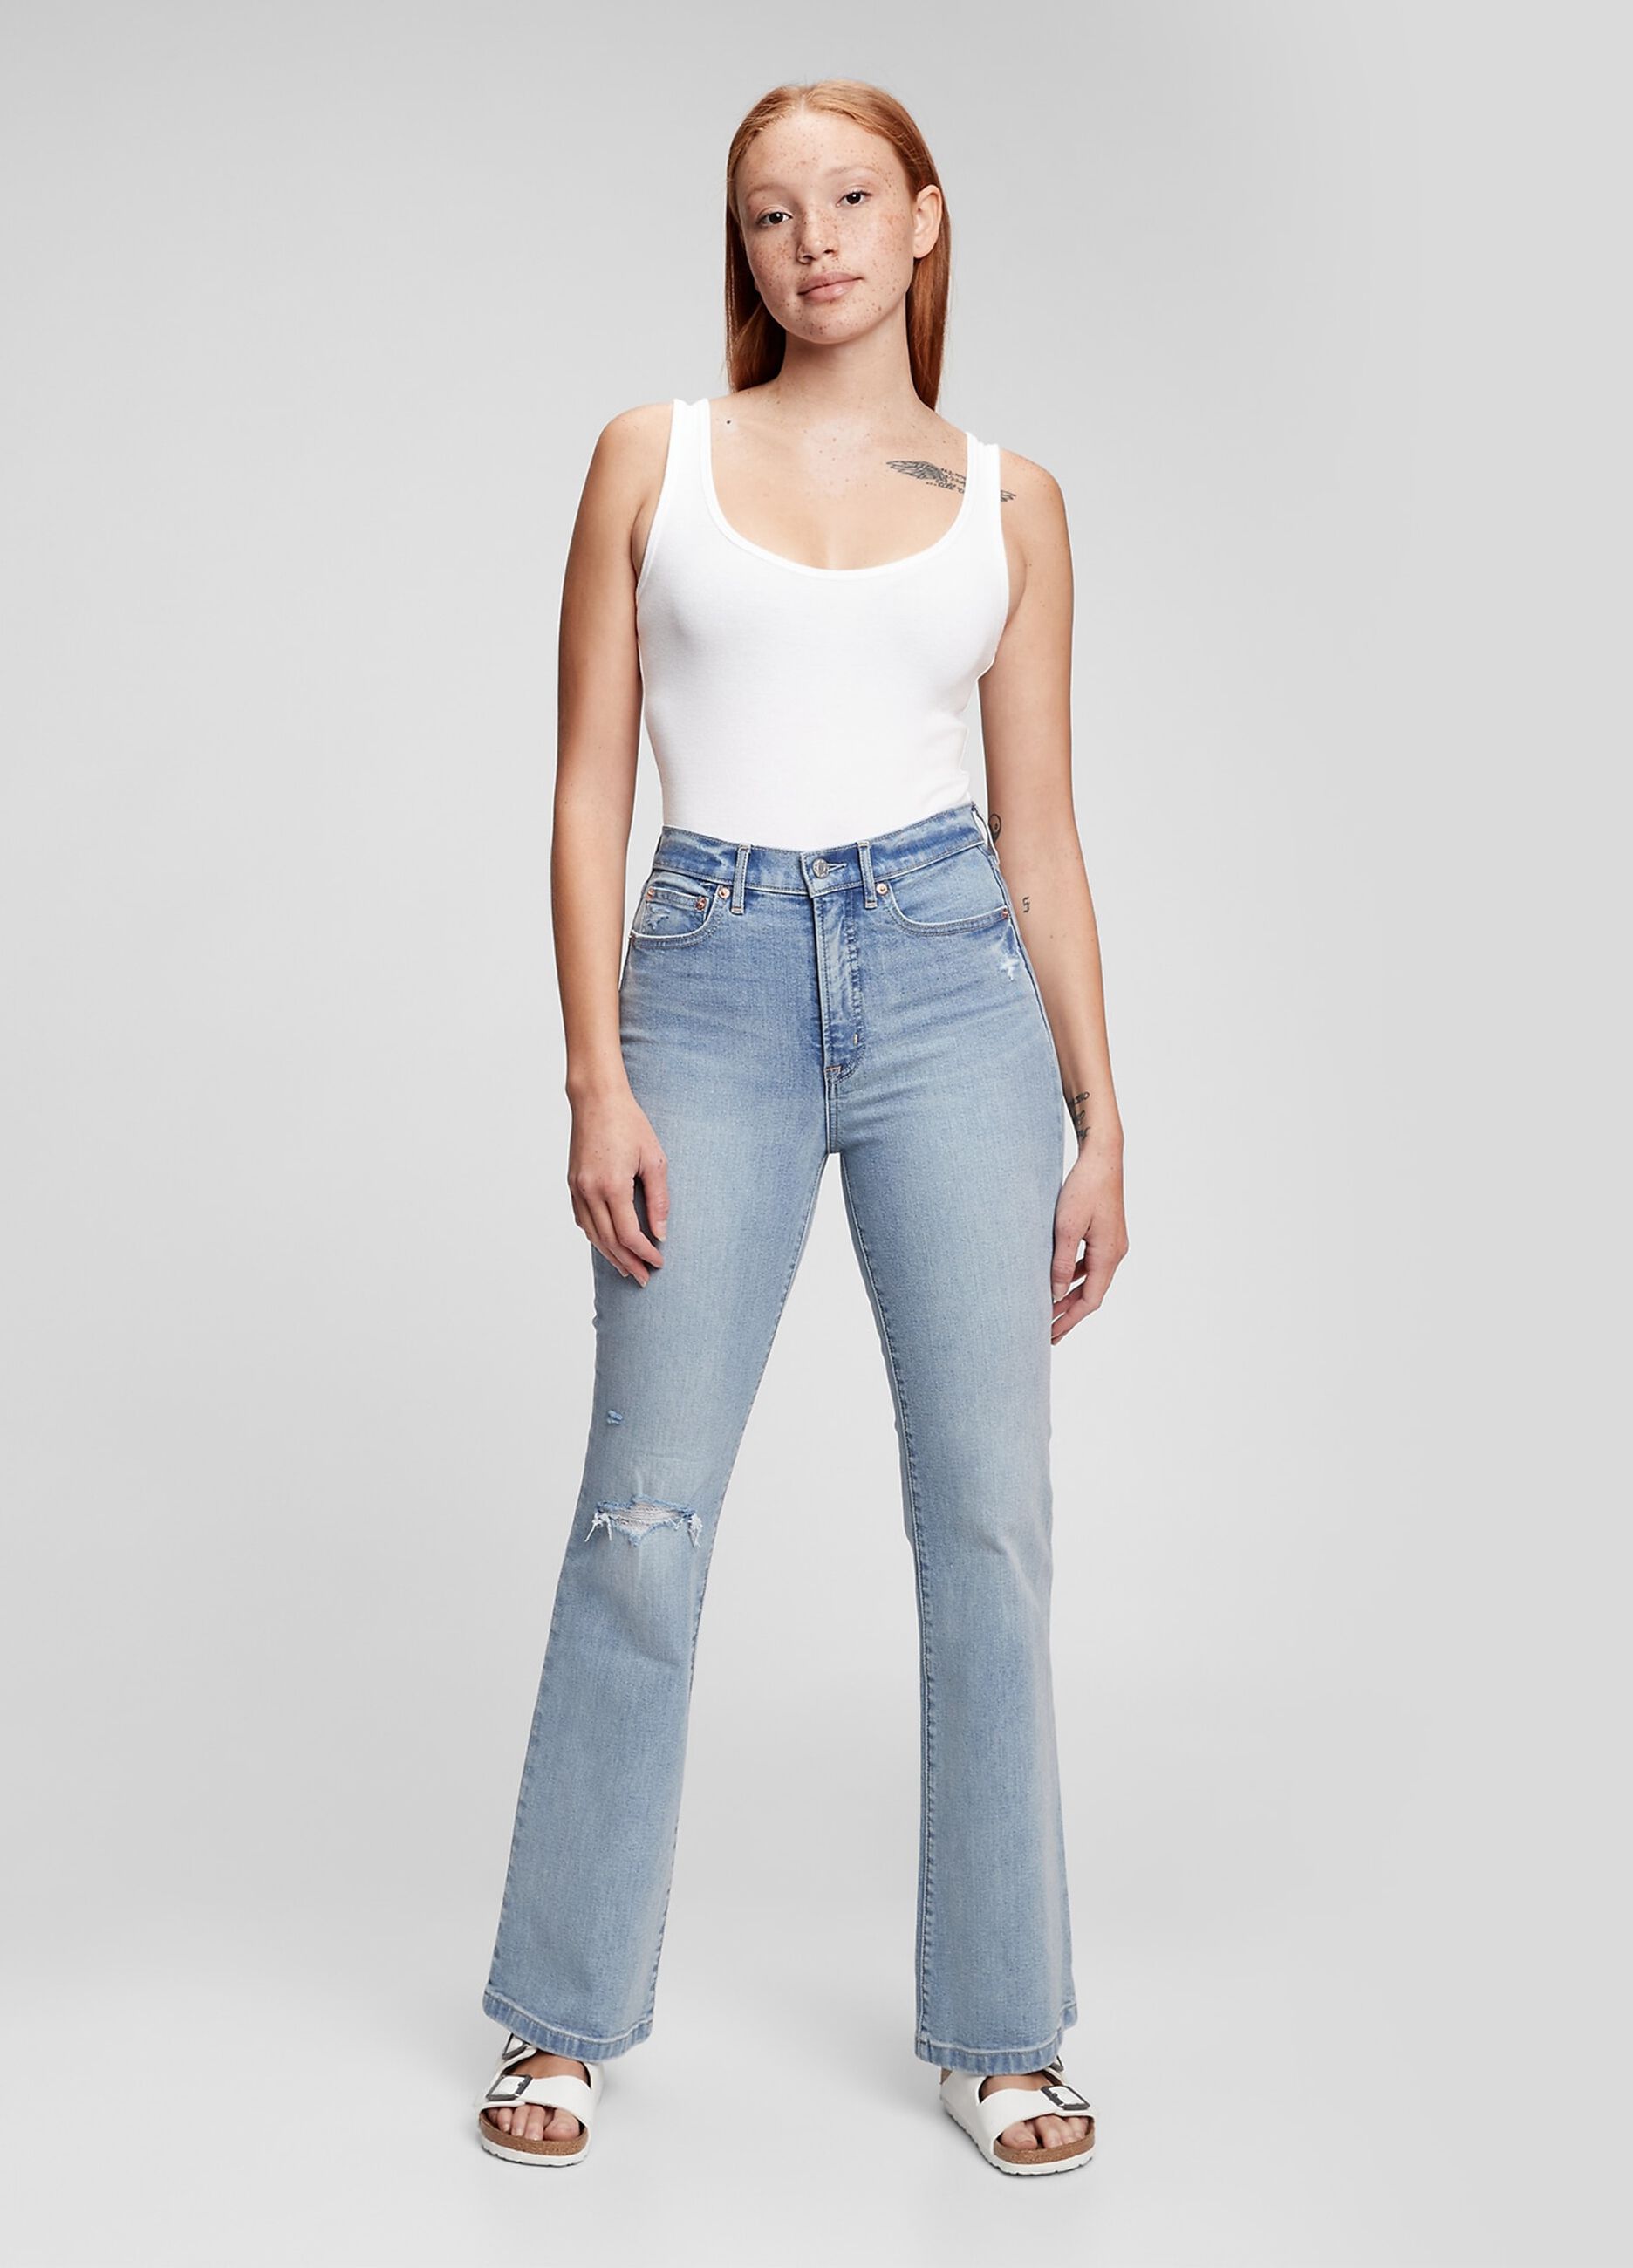 Flare-fit, high-rise jeans with rips